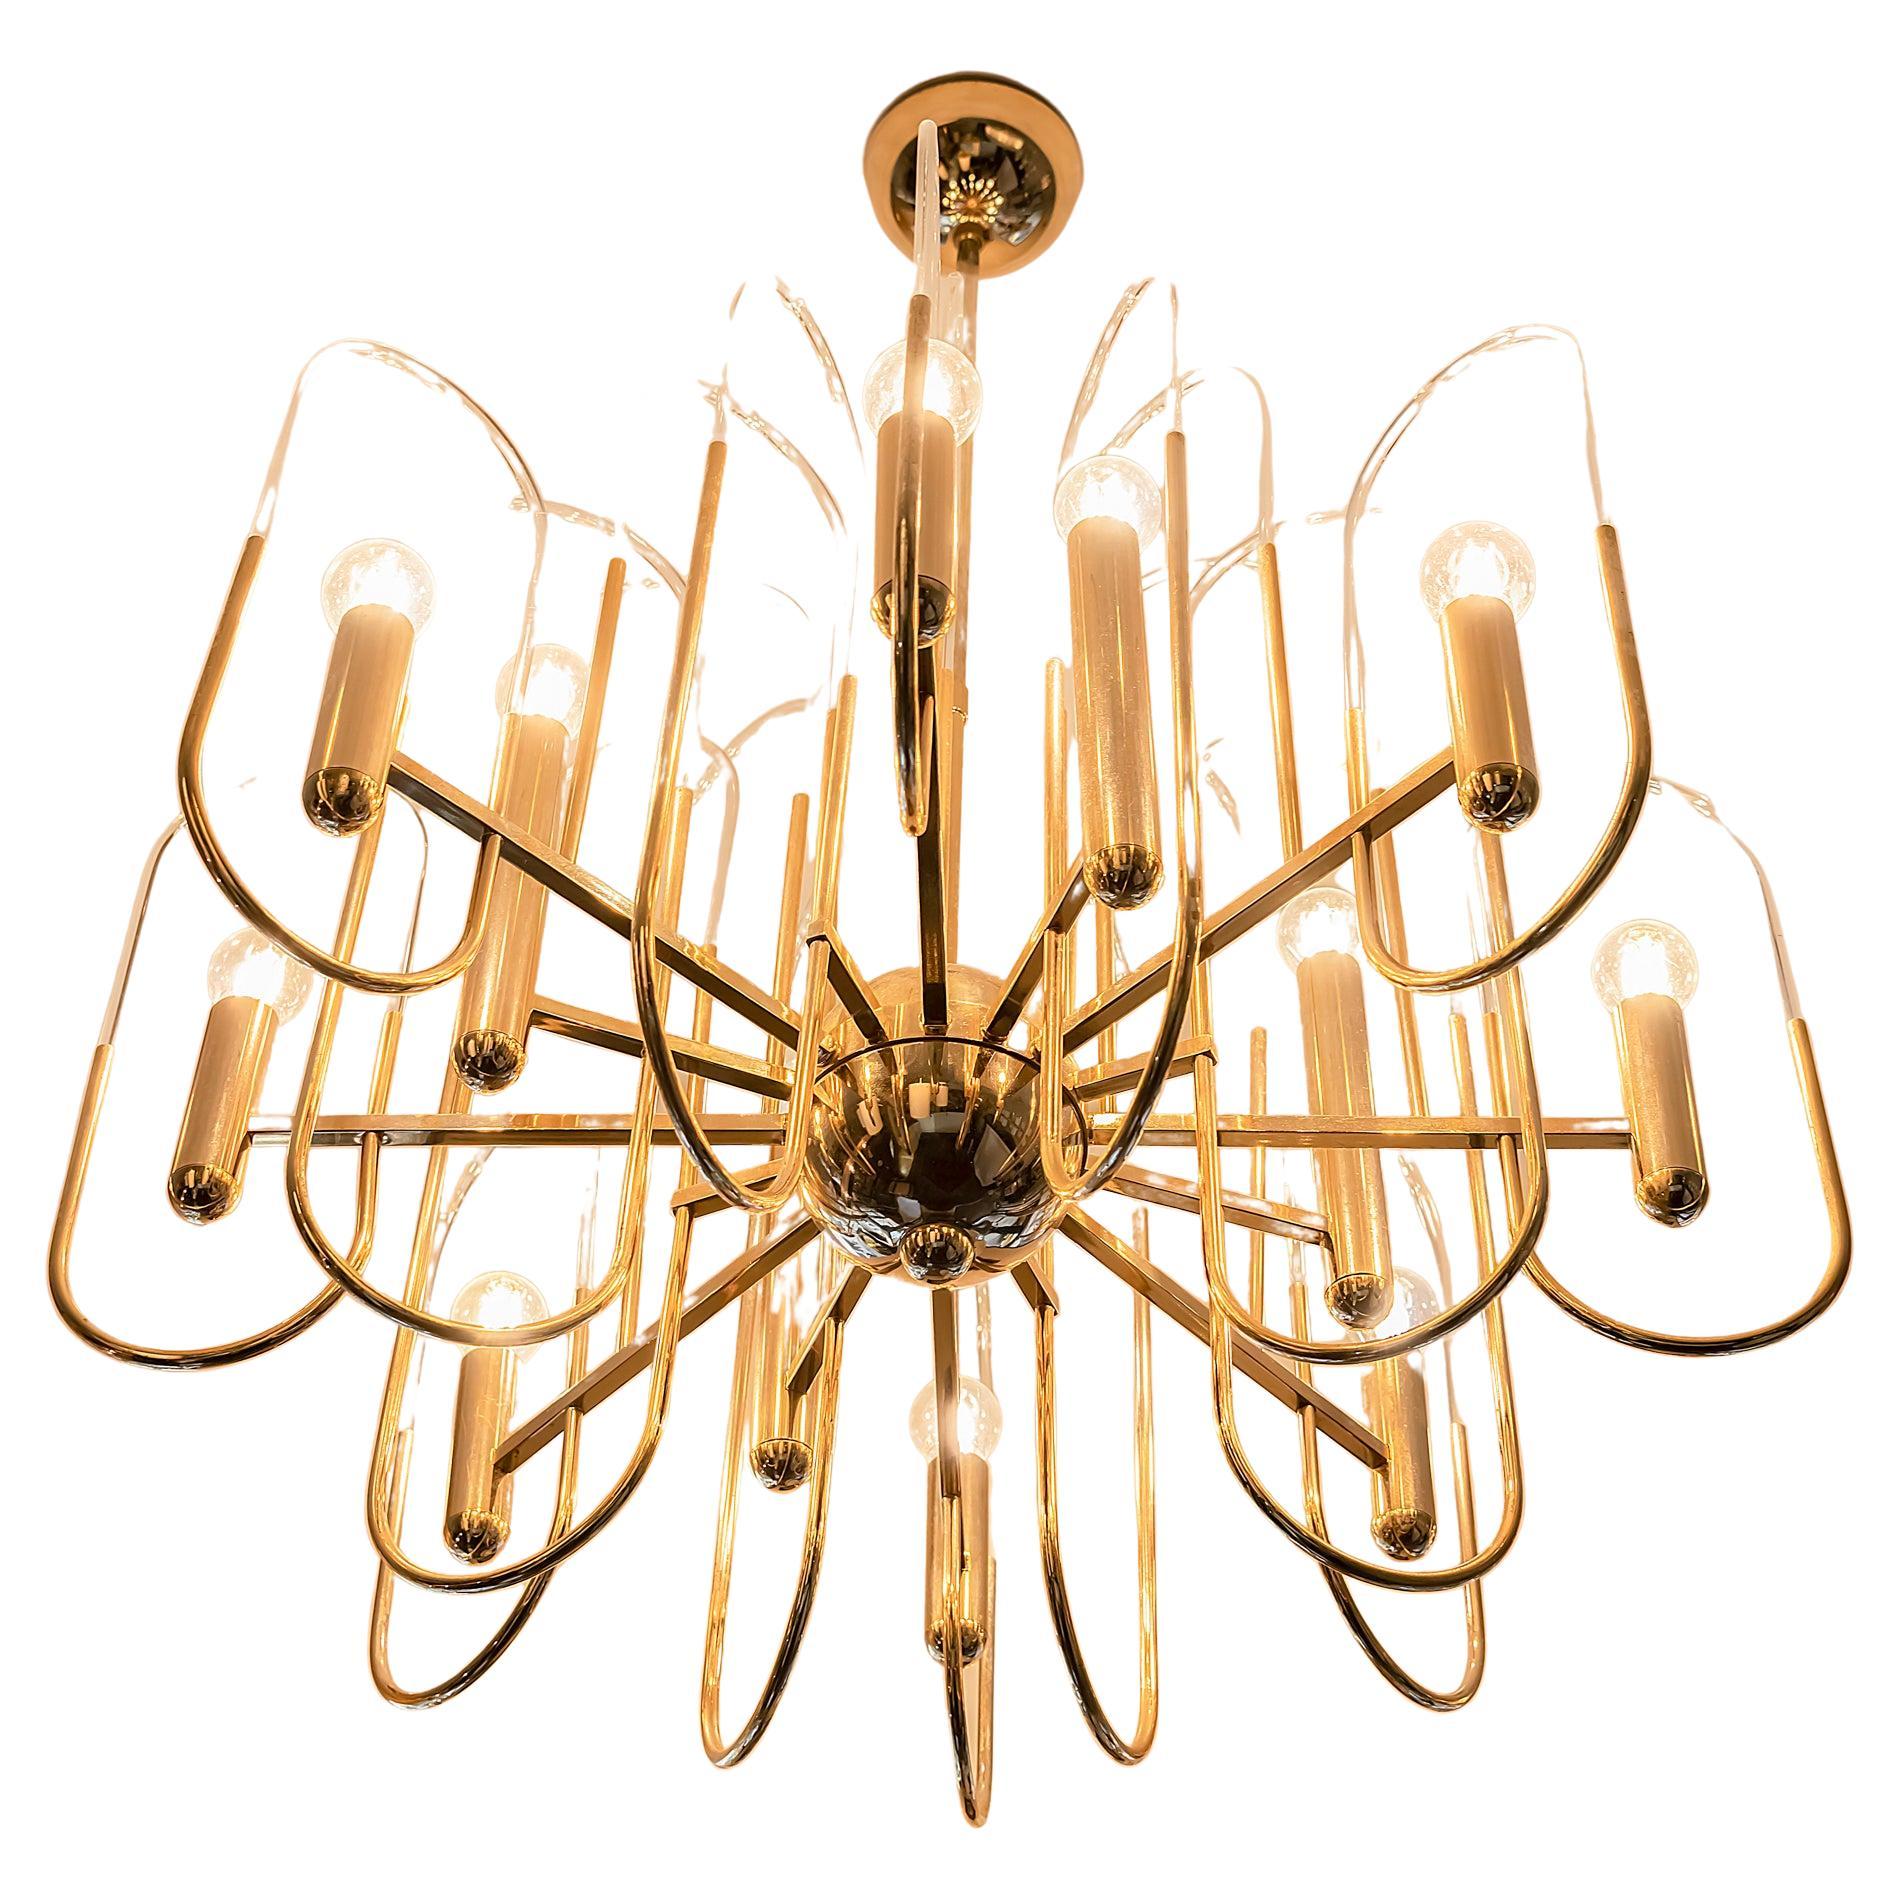 Midcentury Italian Brass and Glass Chandelier by Sciolari For Sale